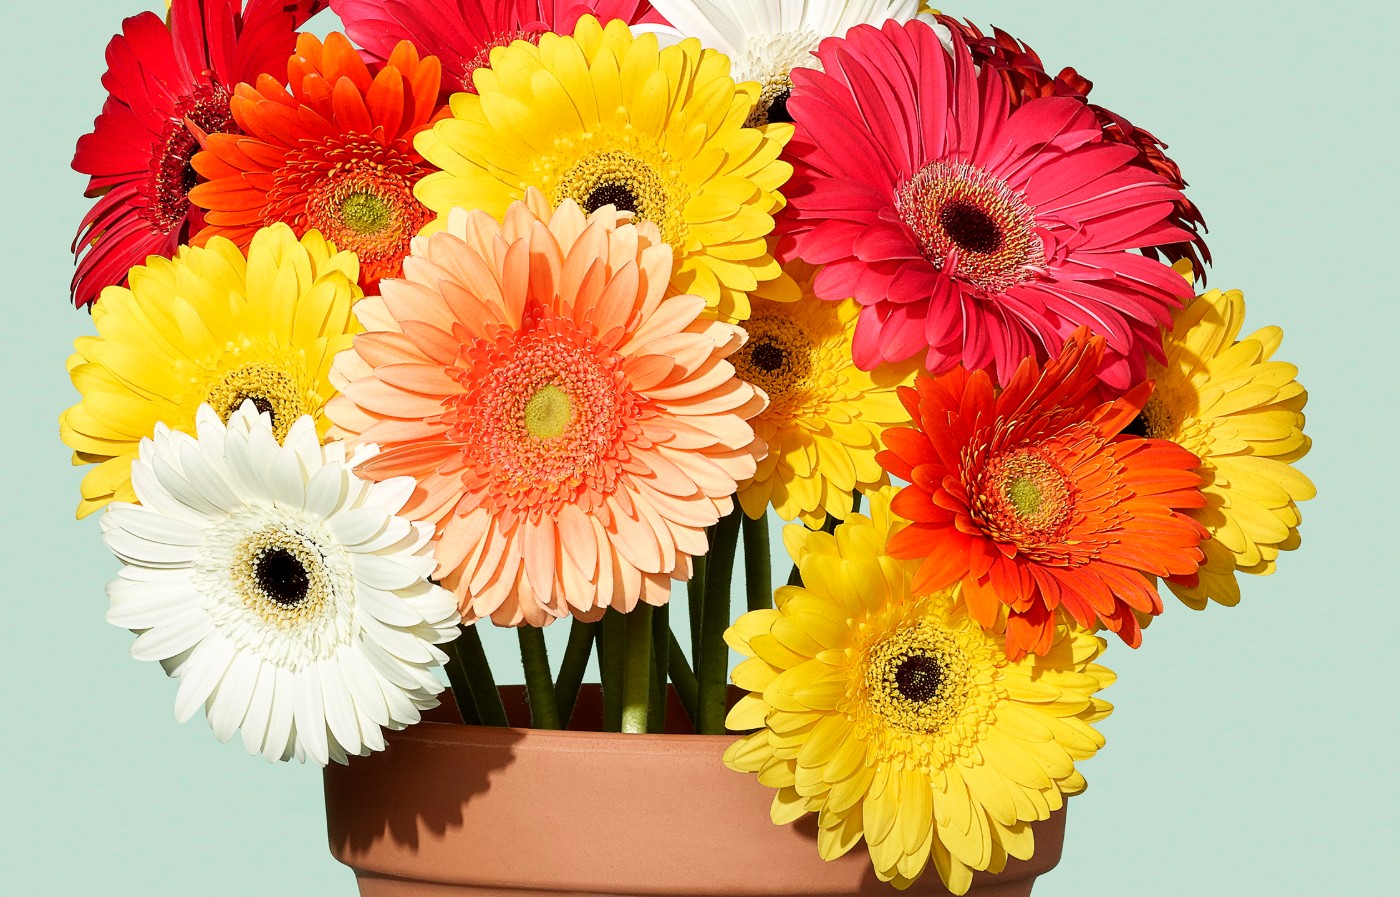 https://tickertapecdn.tdameritrade.com/assets/images/pages/md/Flower pot overgrown with different colored daisies